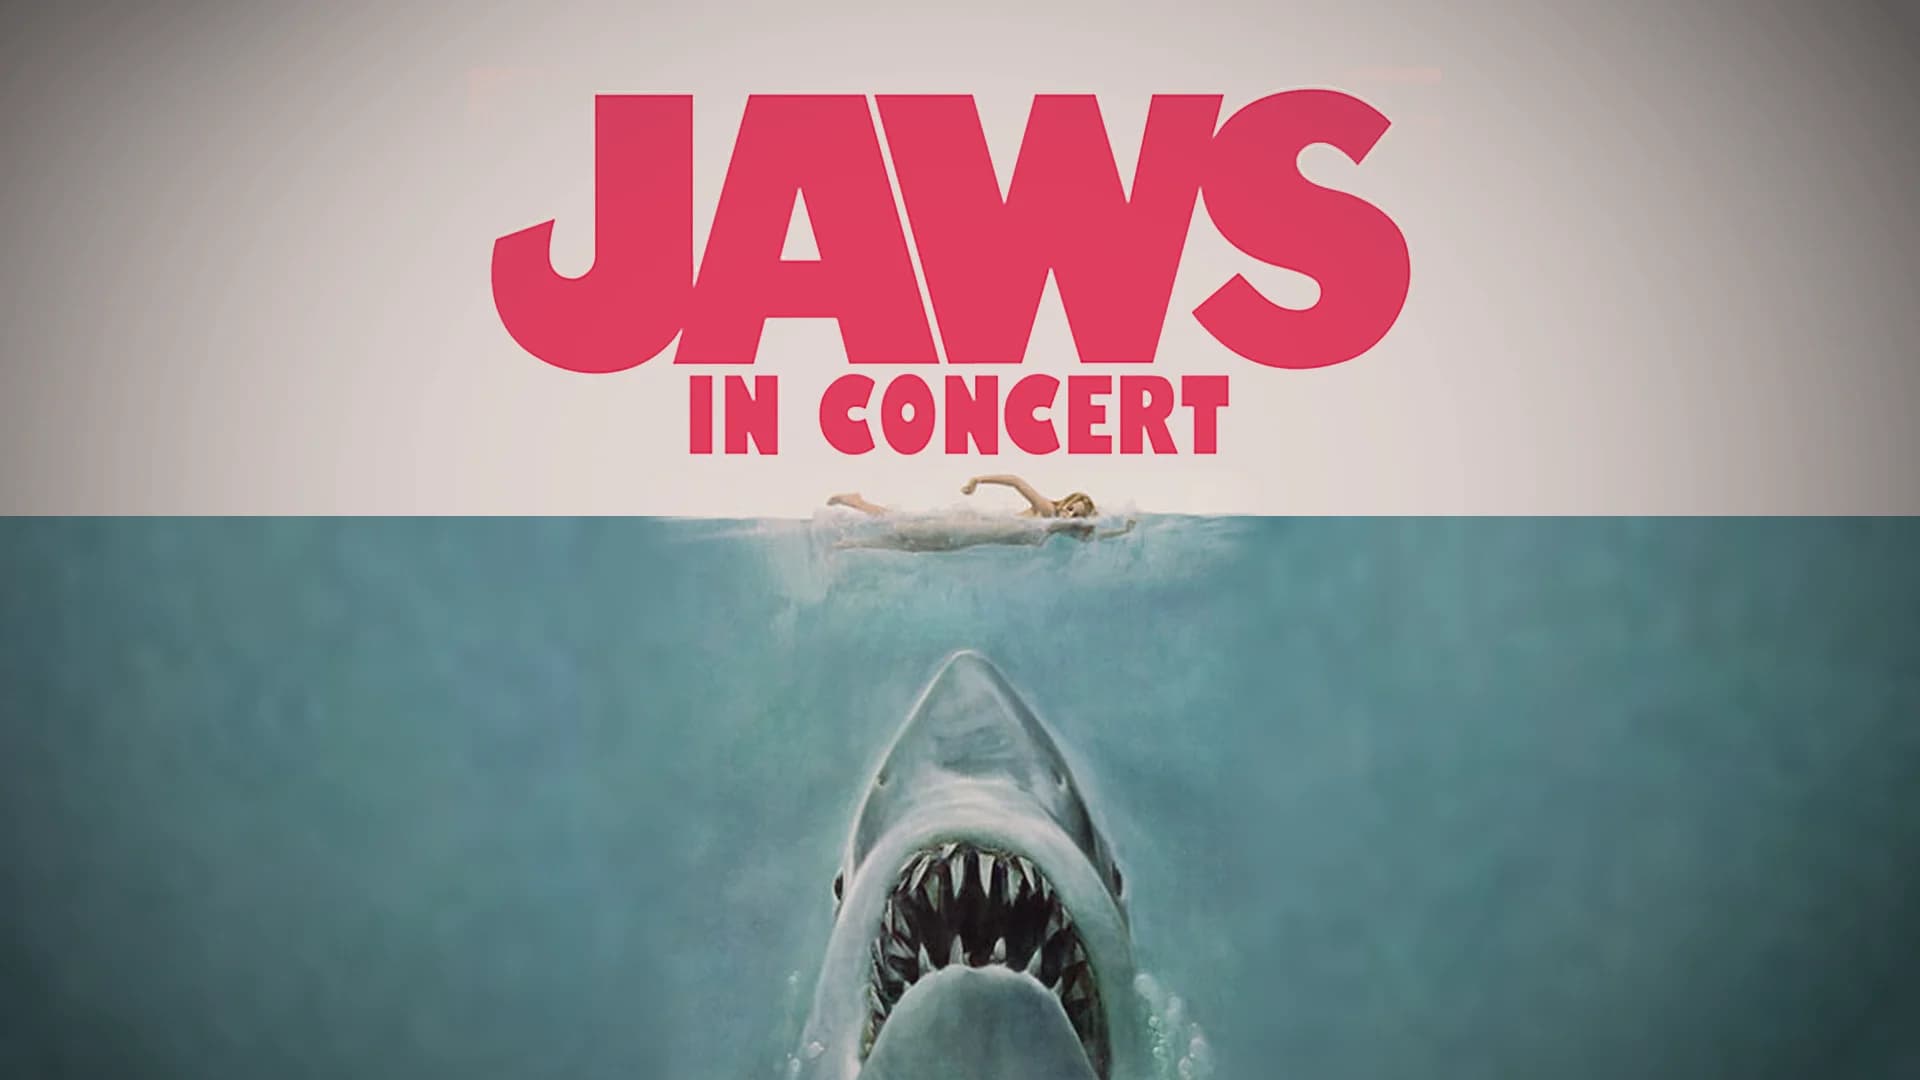 ‘Jaws in Concert’: The most famous shark in the world is stopping by these 3 New Jersey cities.